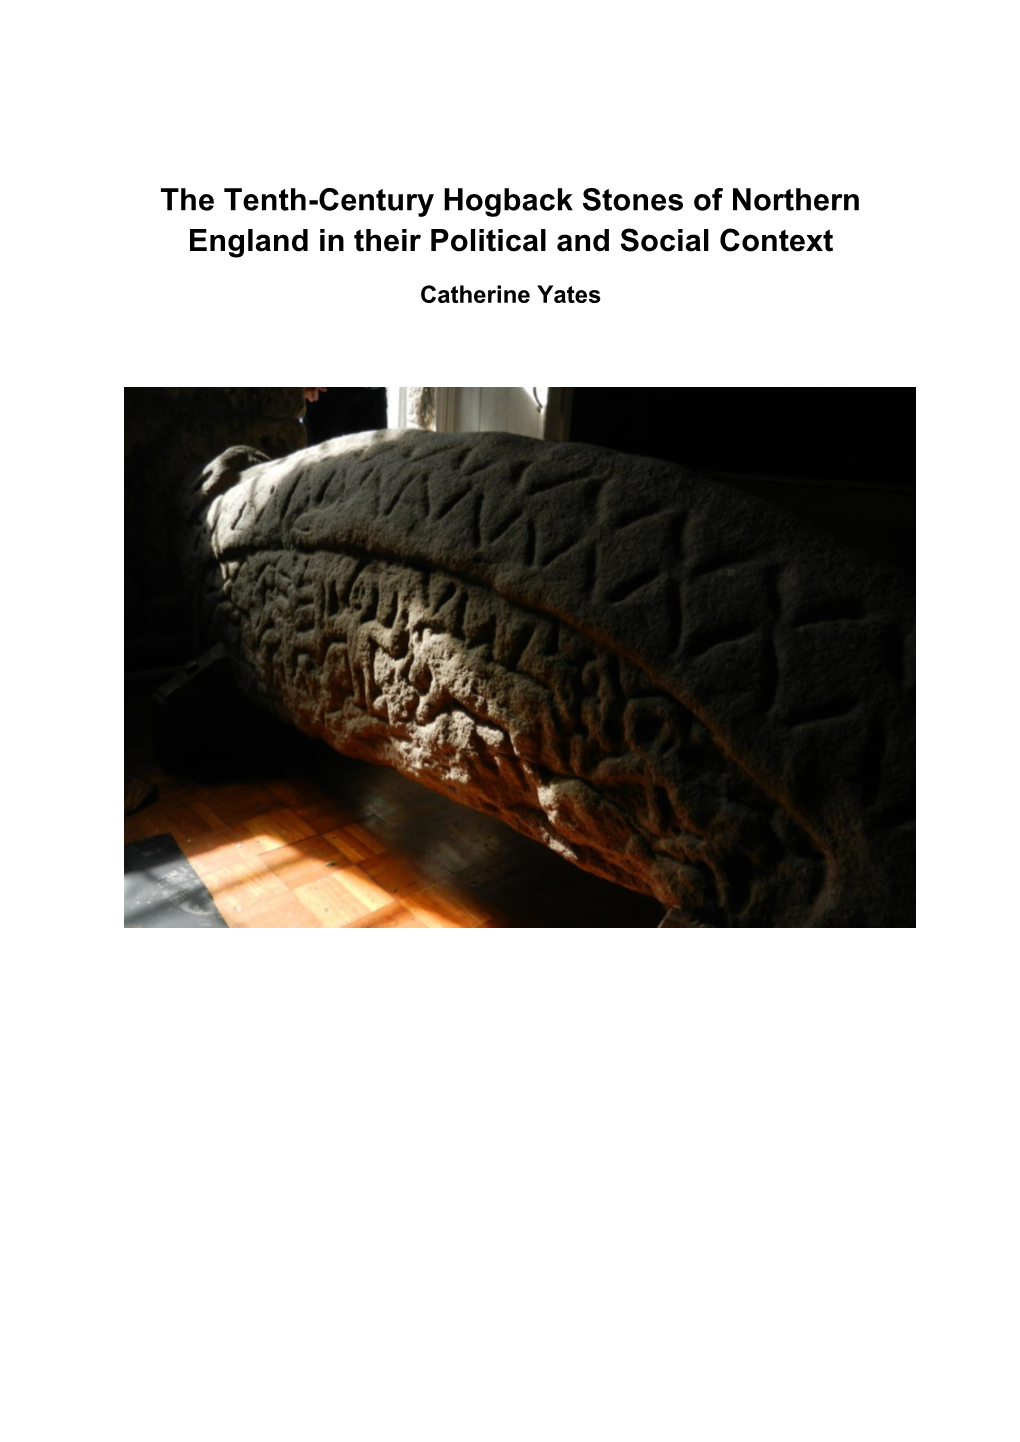 The Tenth-Century Hogback Stones of Northern England in Their Political and Social Context